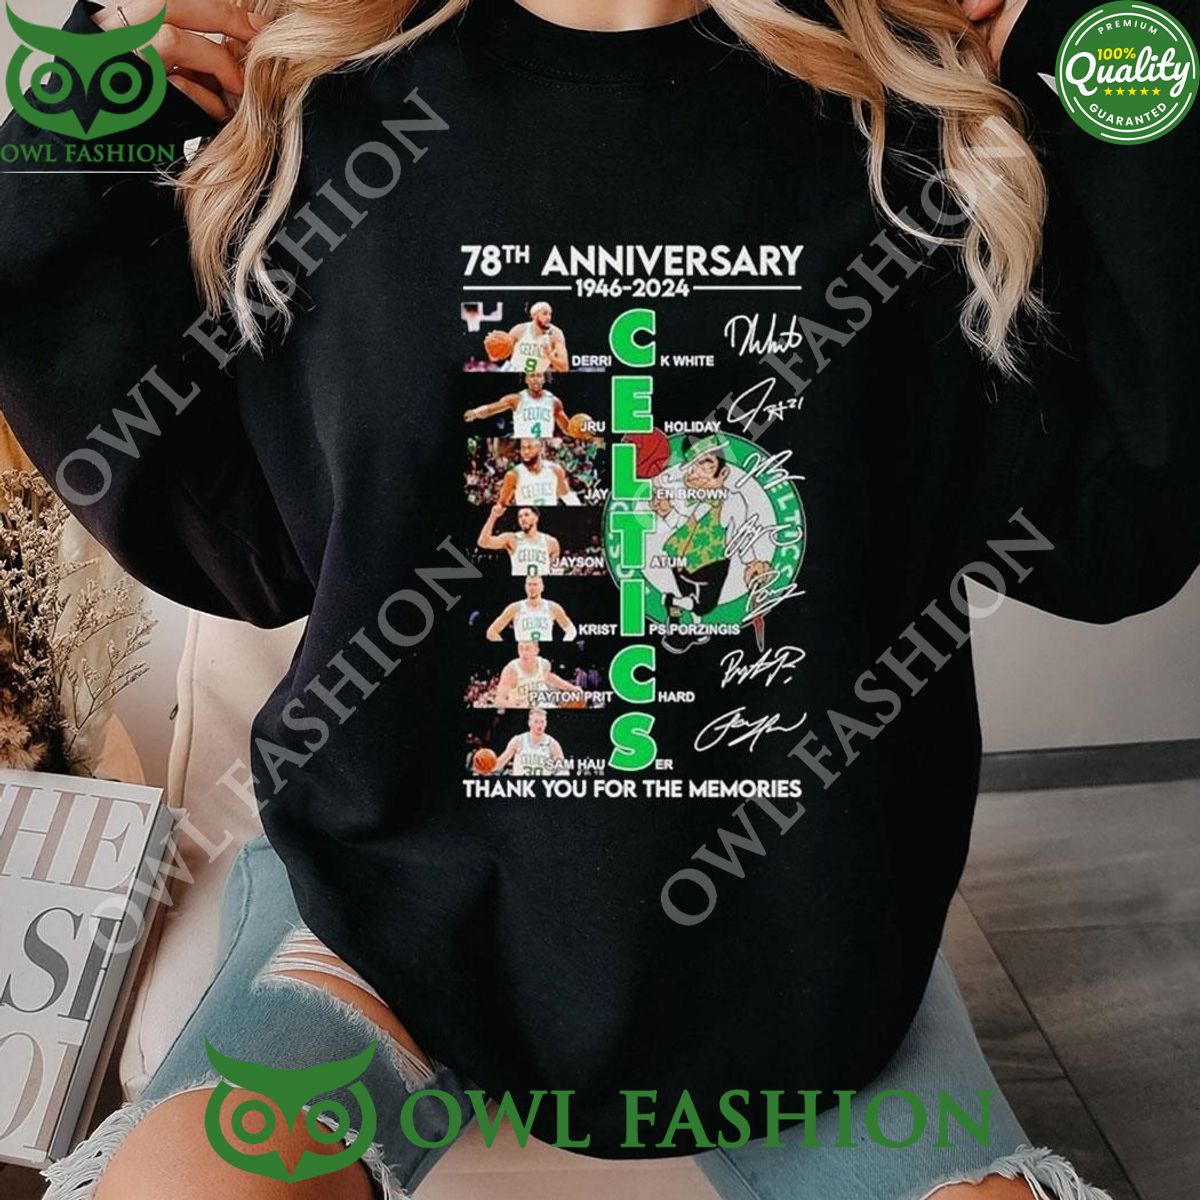 78th Anniversary 1946 Thank You For The Memories 2024 Shirt Hoodie Coolosm